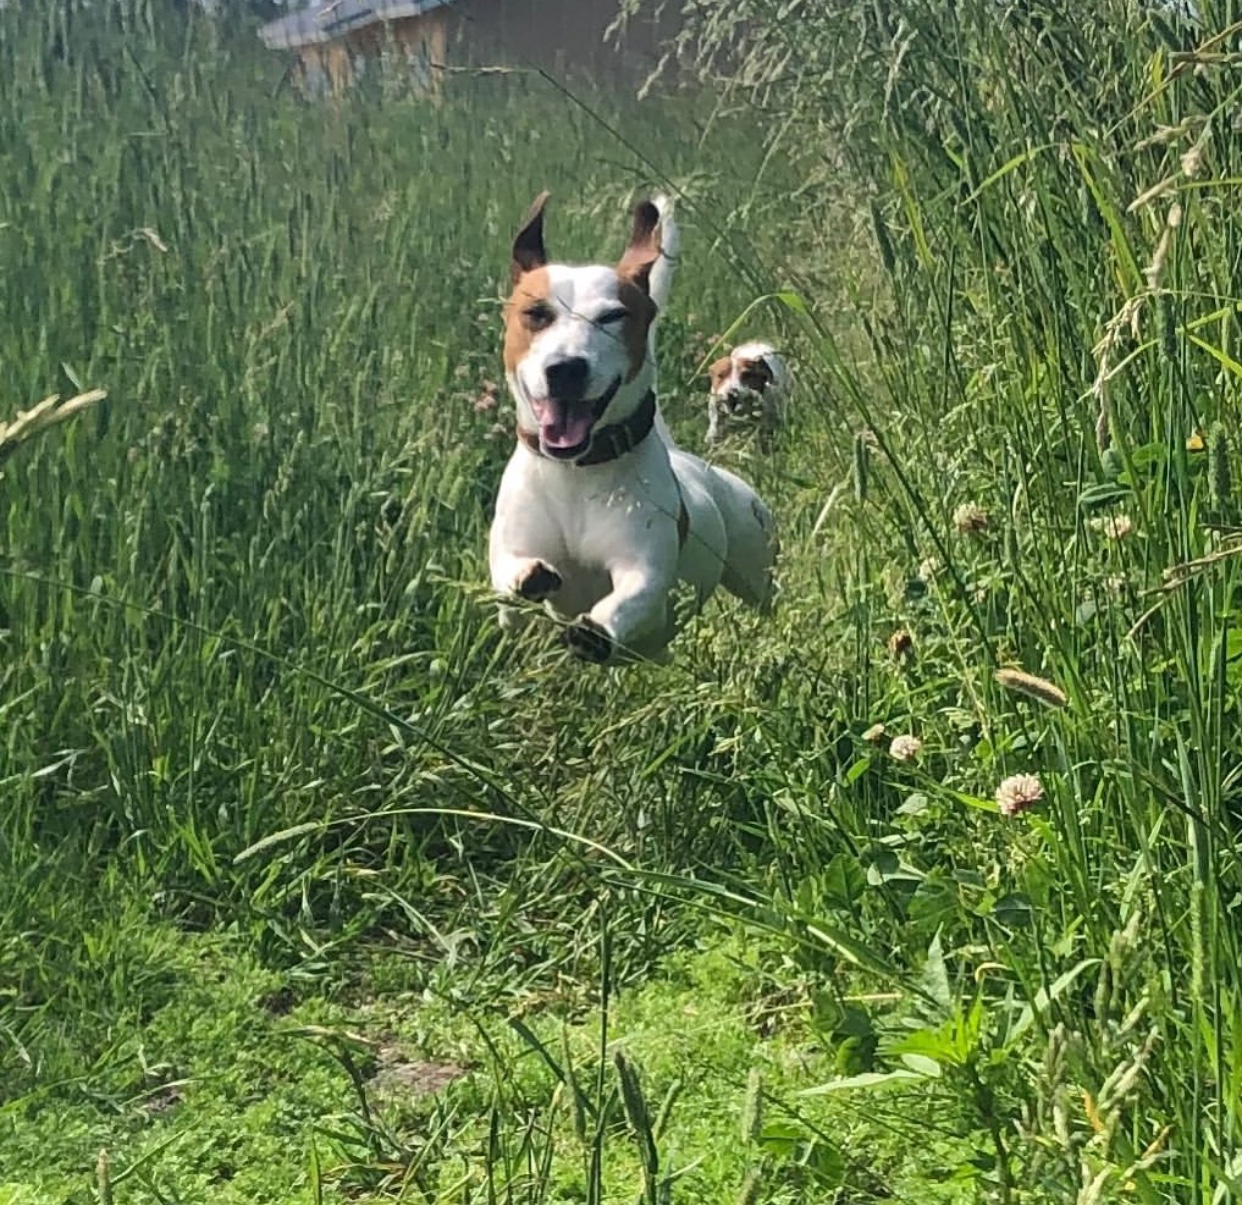 Jack Russell Terrier running in the middle of the field of green grass